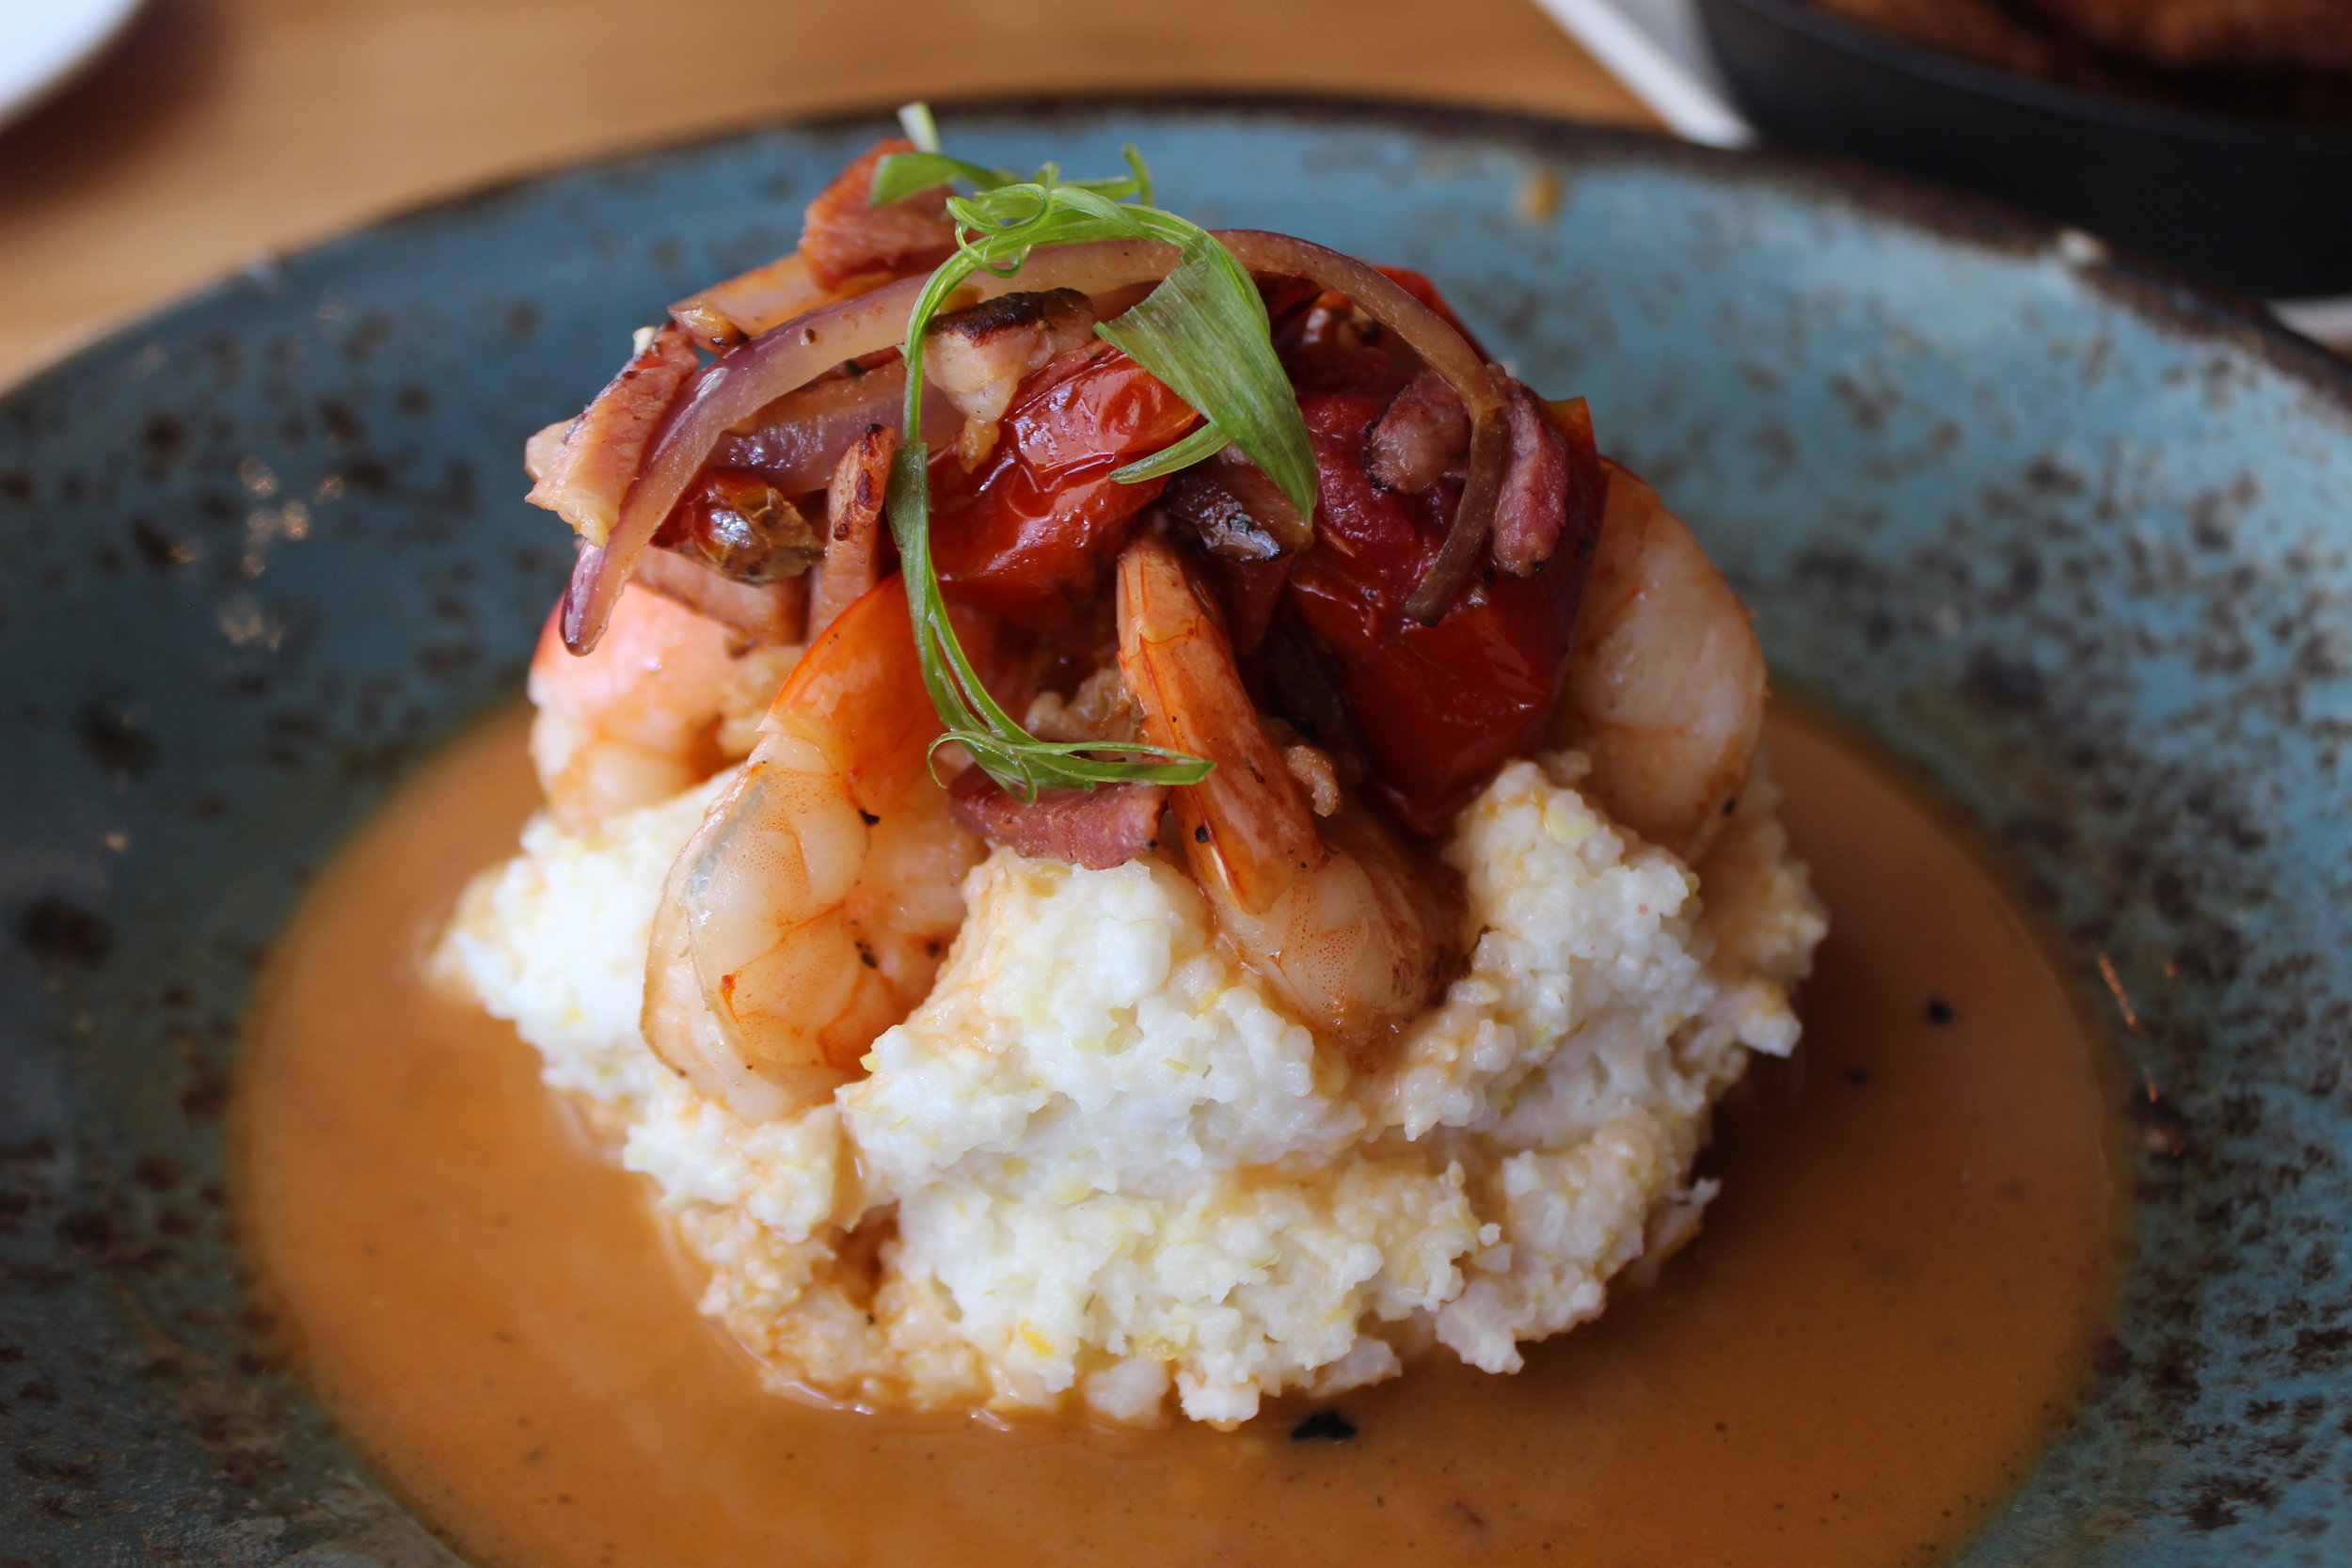 Shrimp n’ Grits: Seared Shrimp, Roasted Tomatoes, Virginia Ham, Nora Mill Grits, PBR Chicken Jus